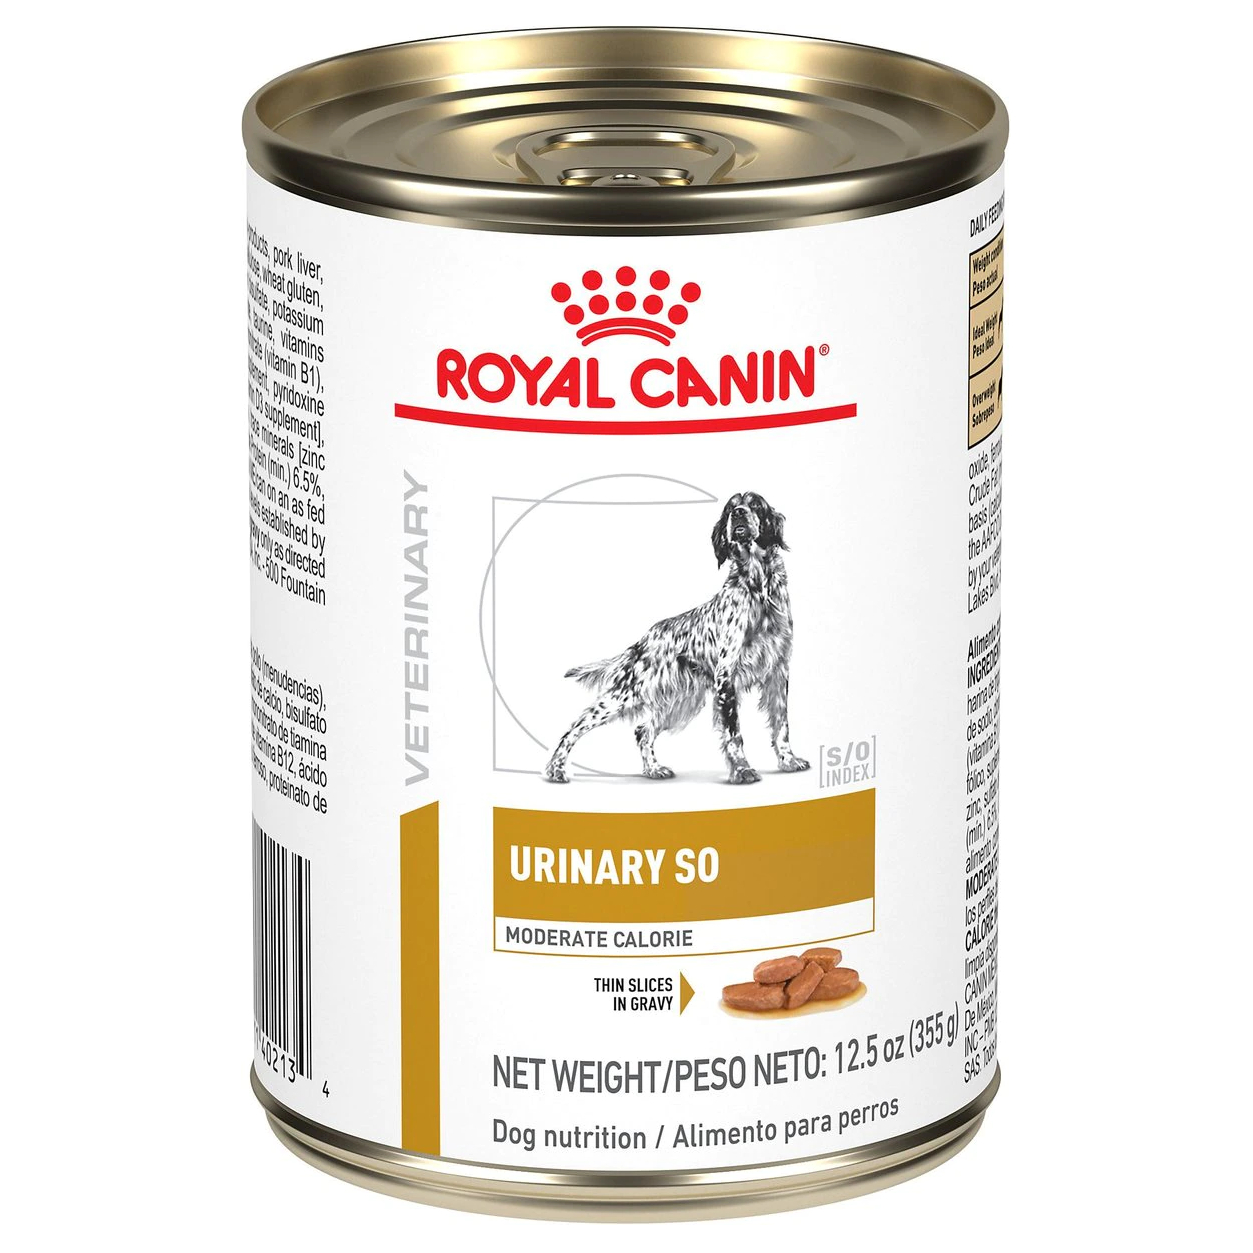 Royal Canin Adult Urinary Moderate Calorie